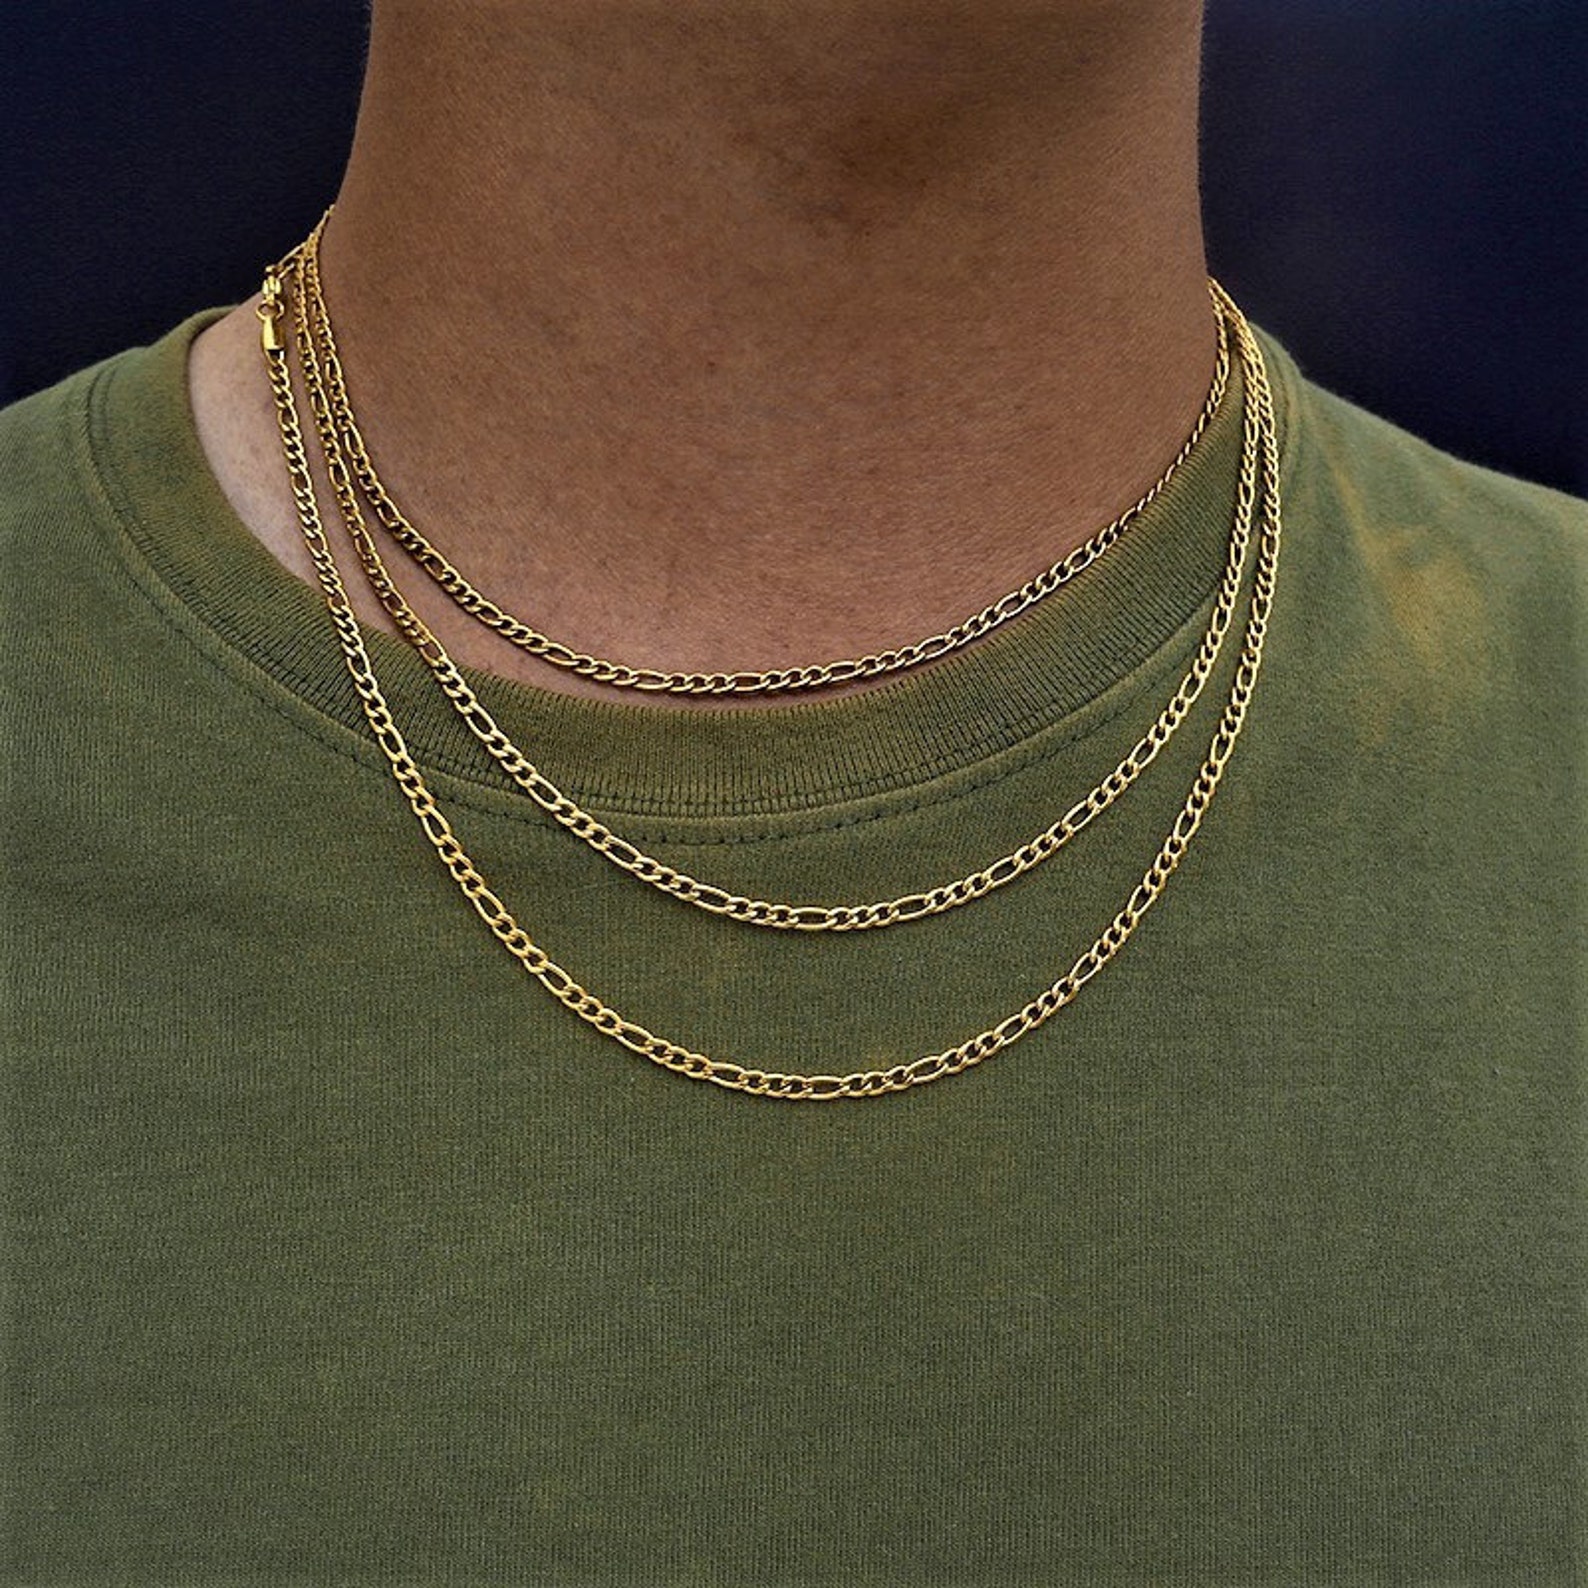 18K Gold Figaro Chain Choker Necklace Mens Streetsyle Chain | Etsy